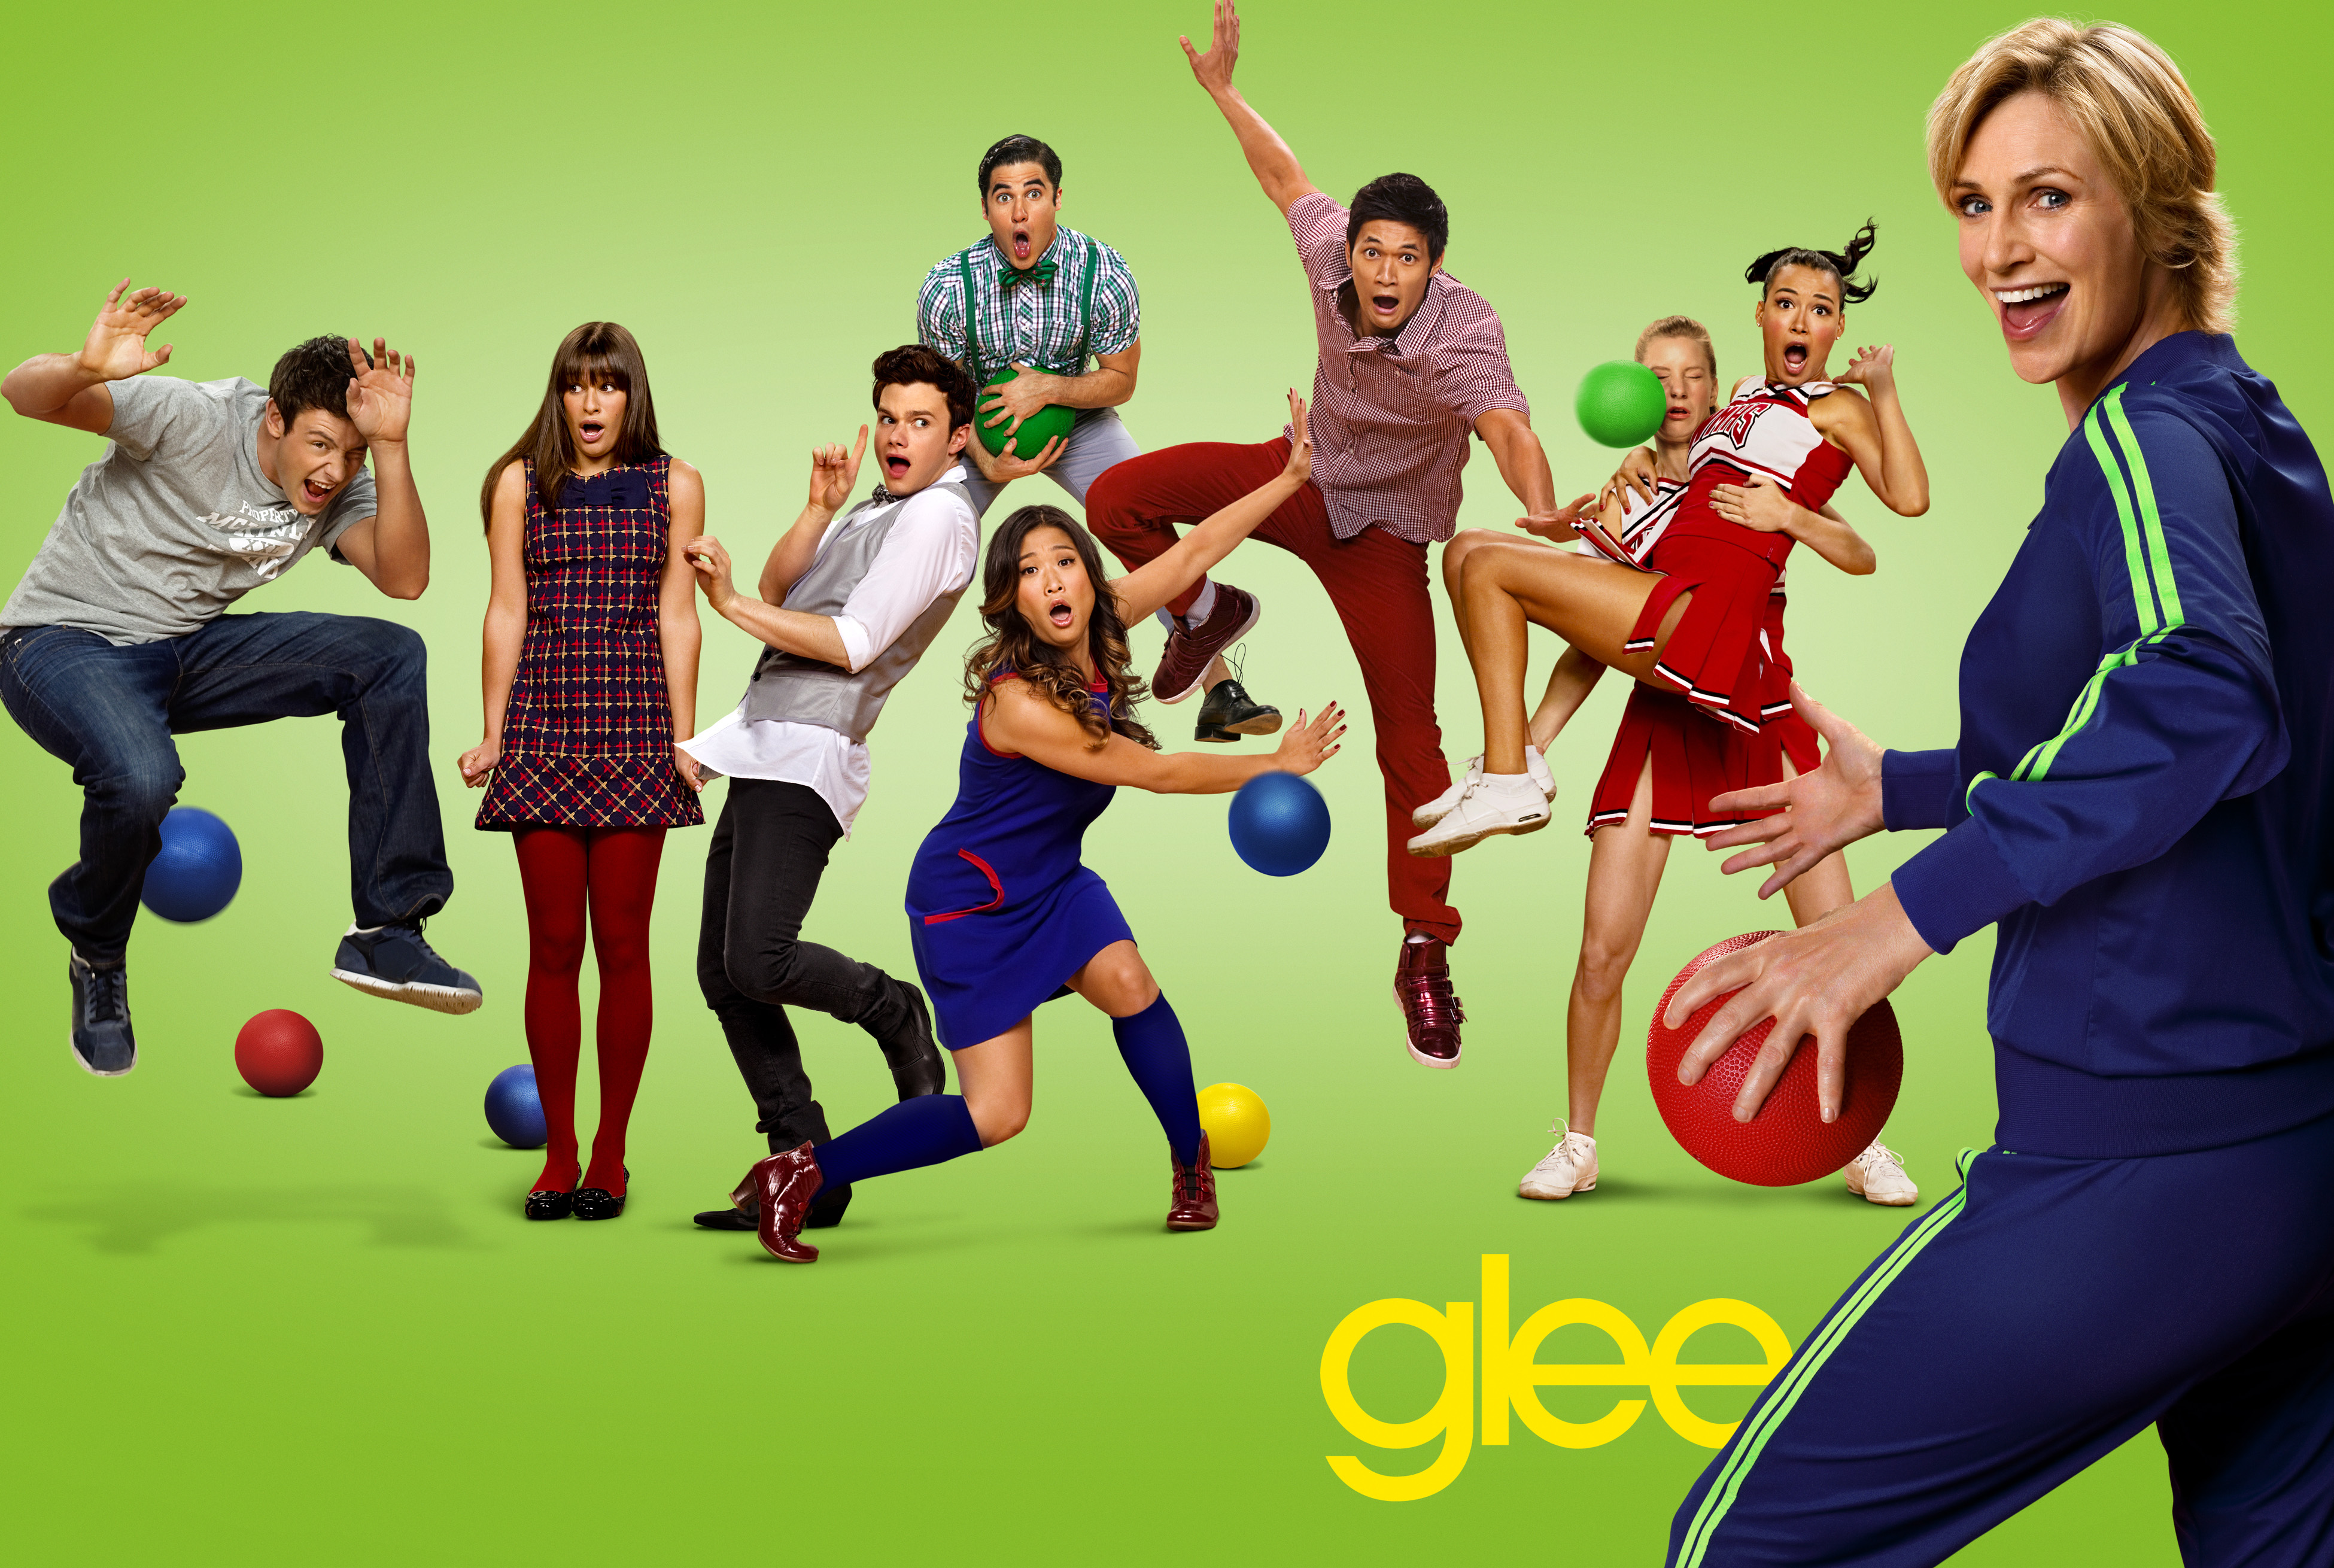 Images of Glee | 3900x2620